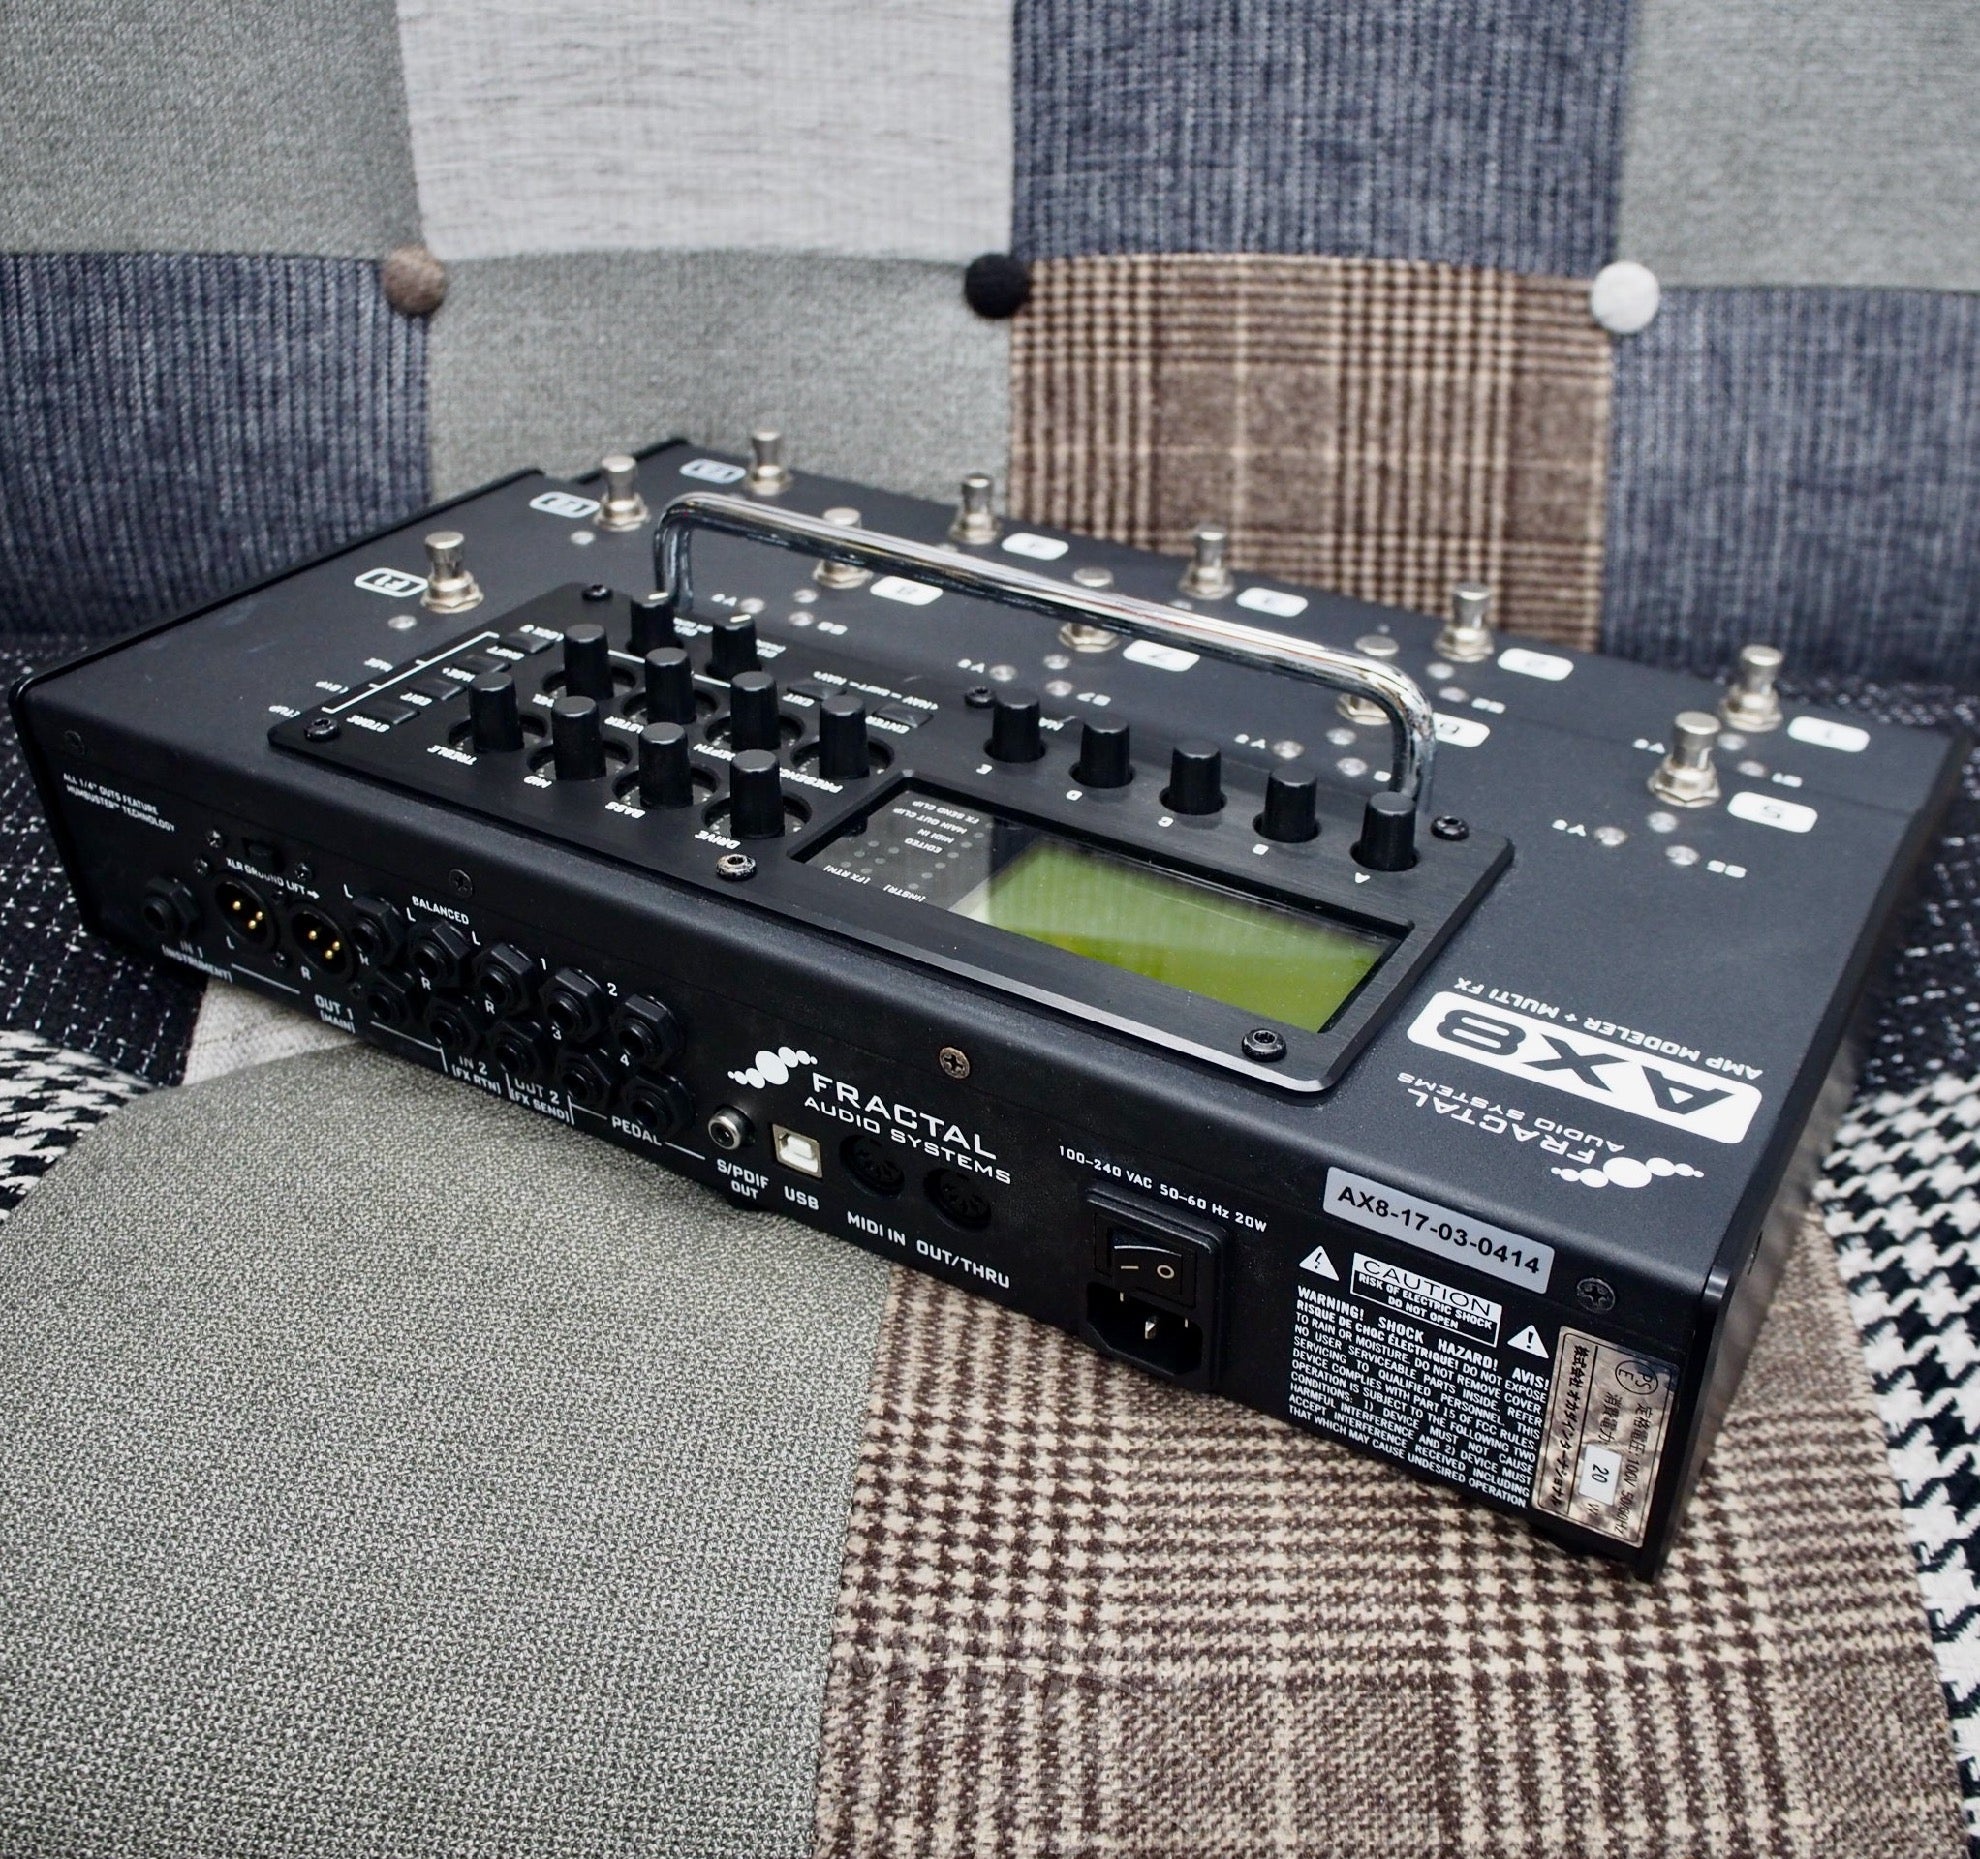 Fractal Audio Systems AX8 + ギグバッグ - ギター